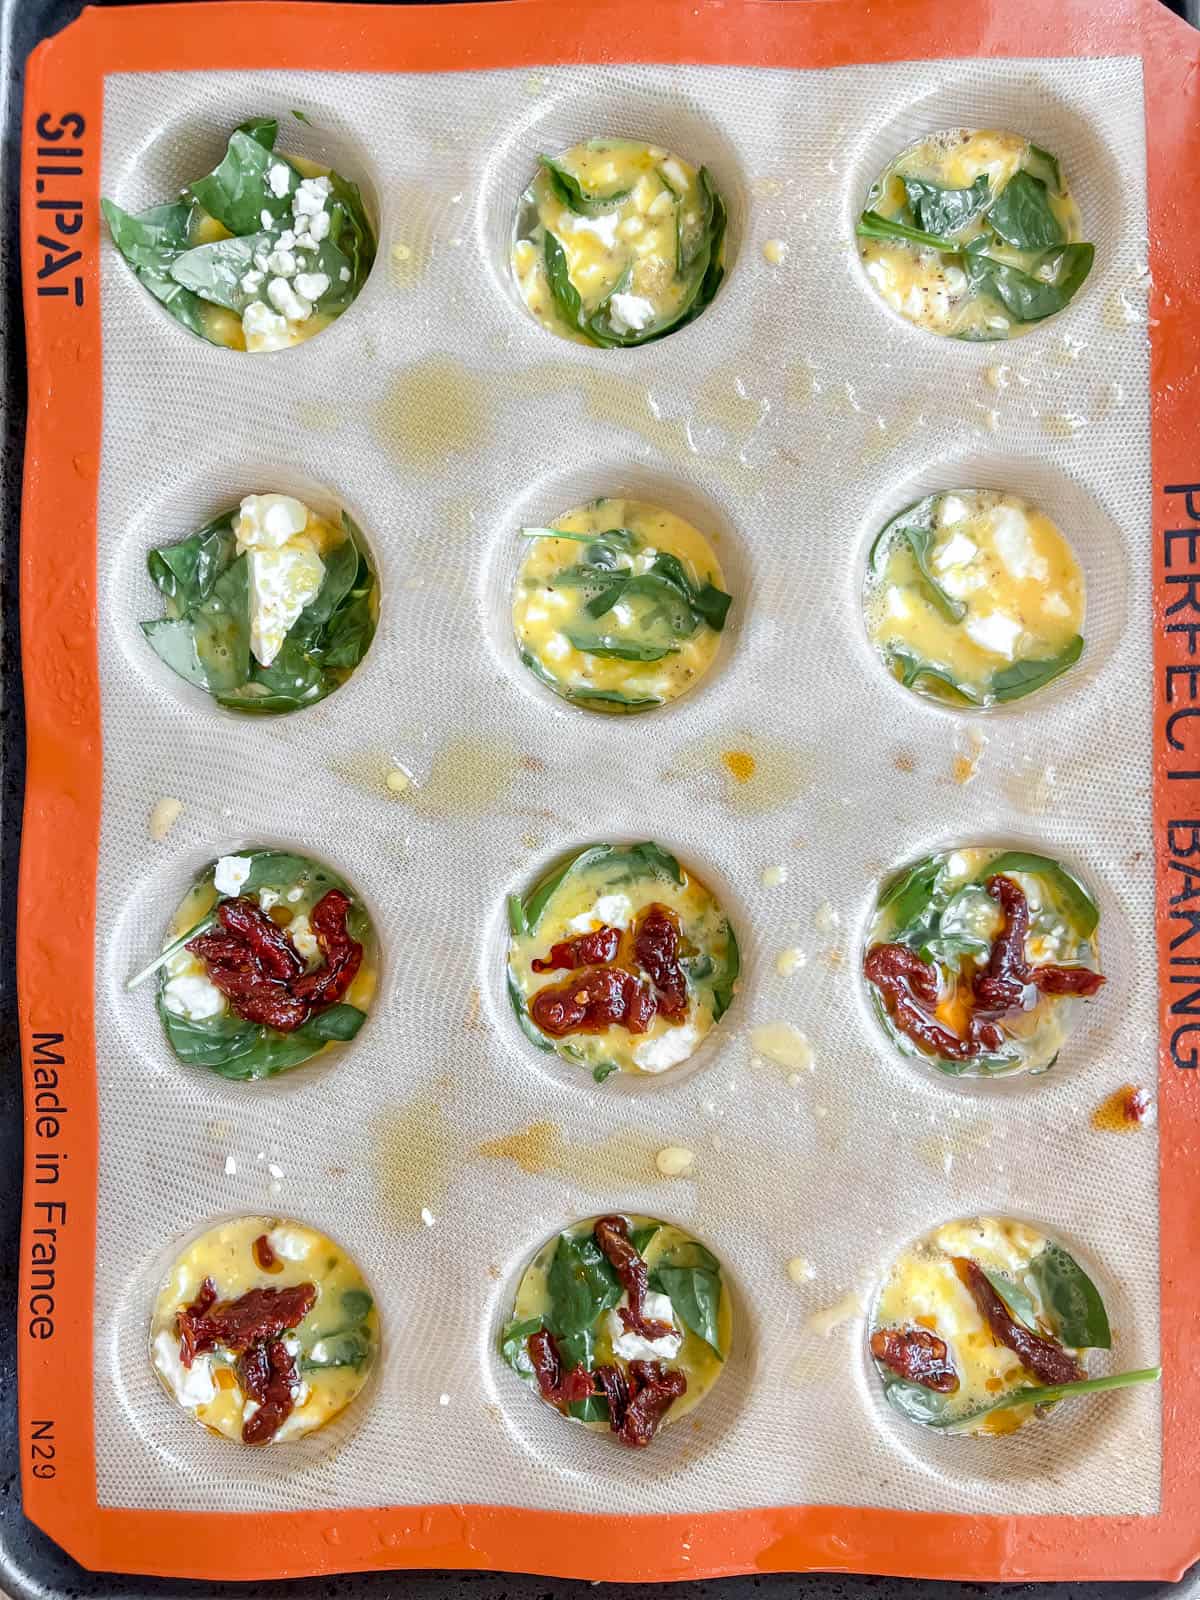 Egg mixture added to each muffin tin.